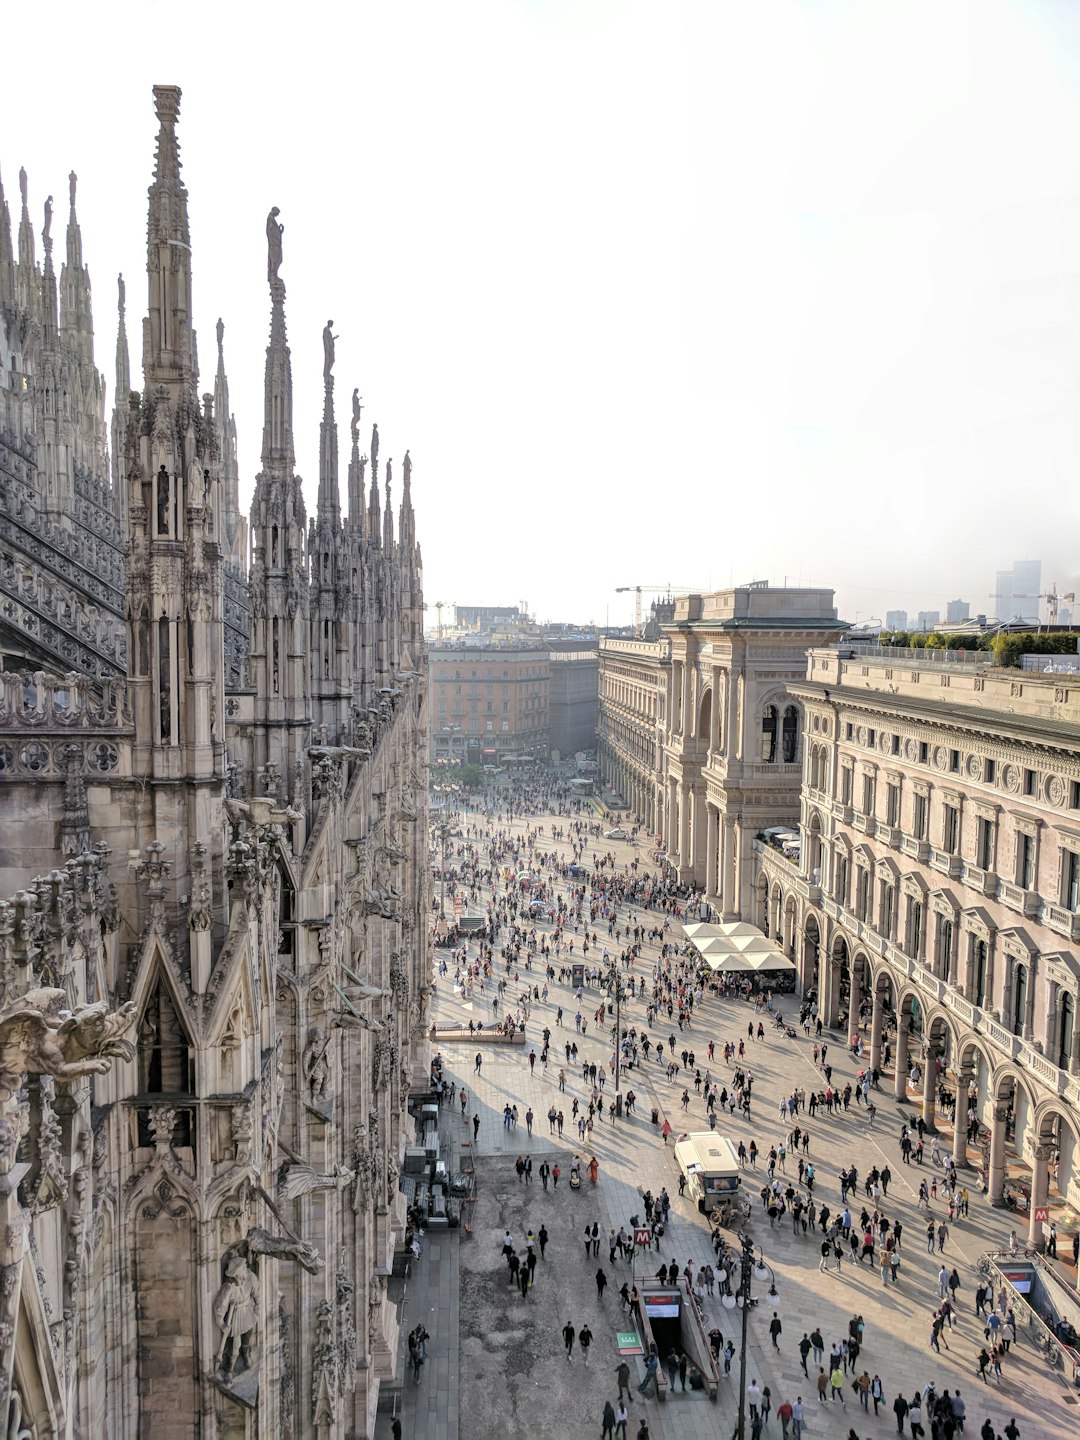 Travel Tips and Stories of Piazza del Duomo in Italy